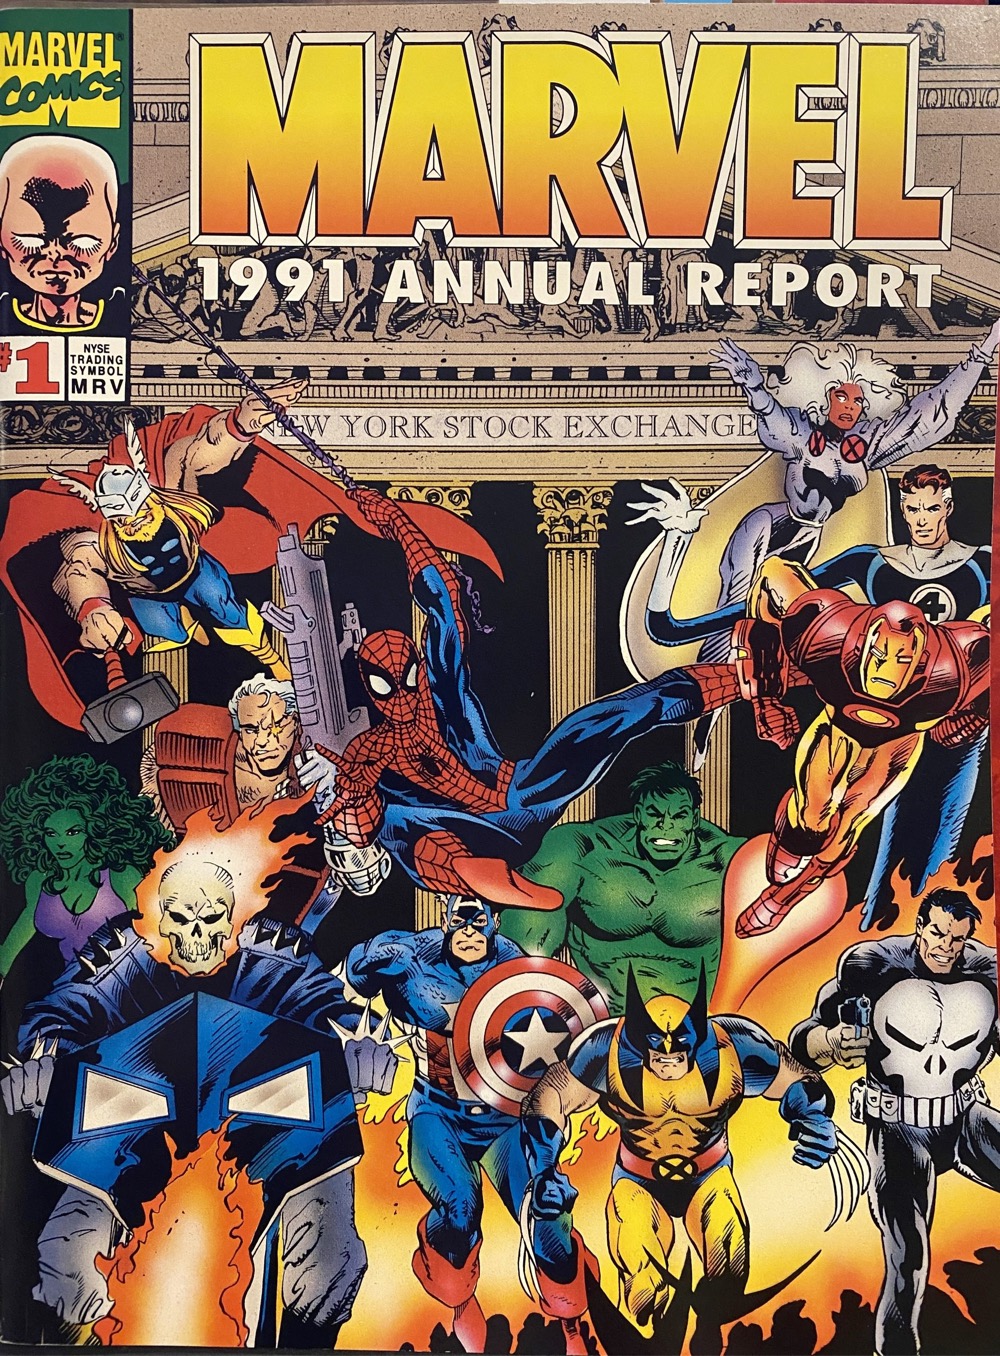 front cover of the 1991 Marvel Annual Report featuring several Marvel characters